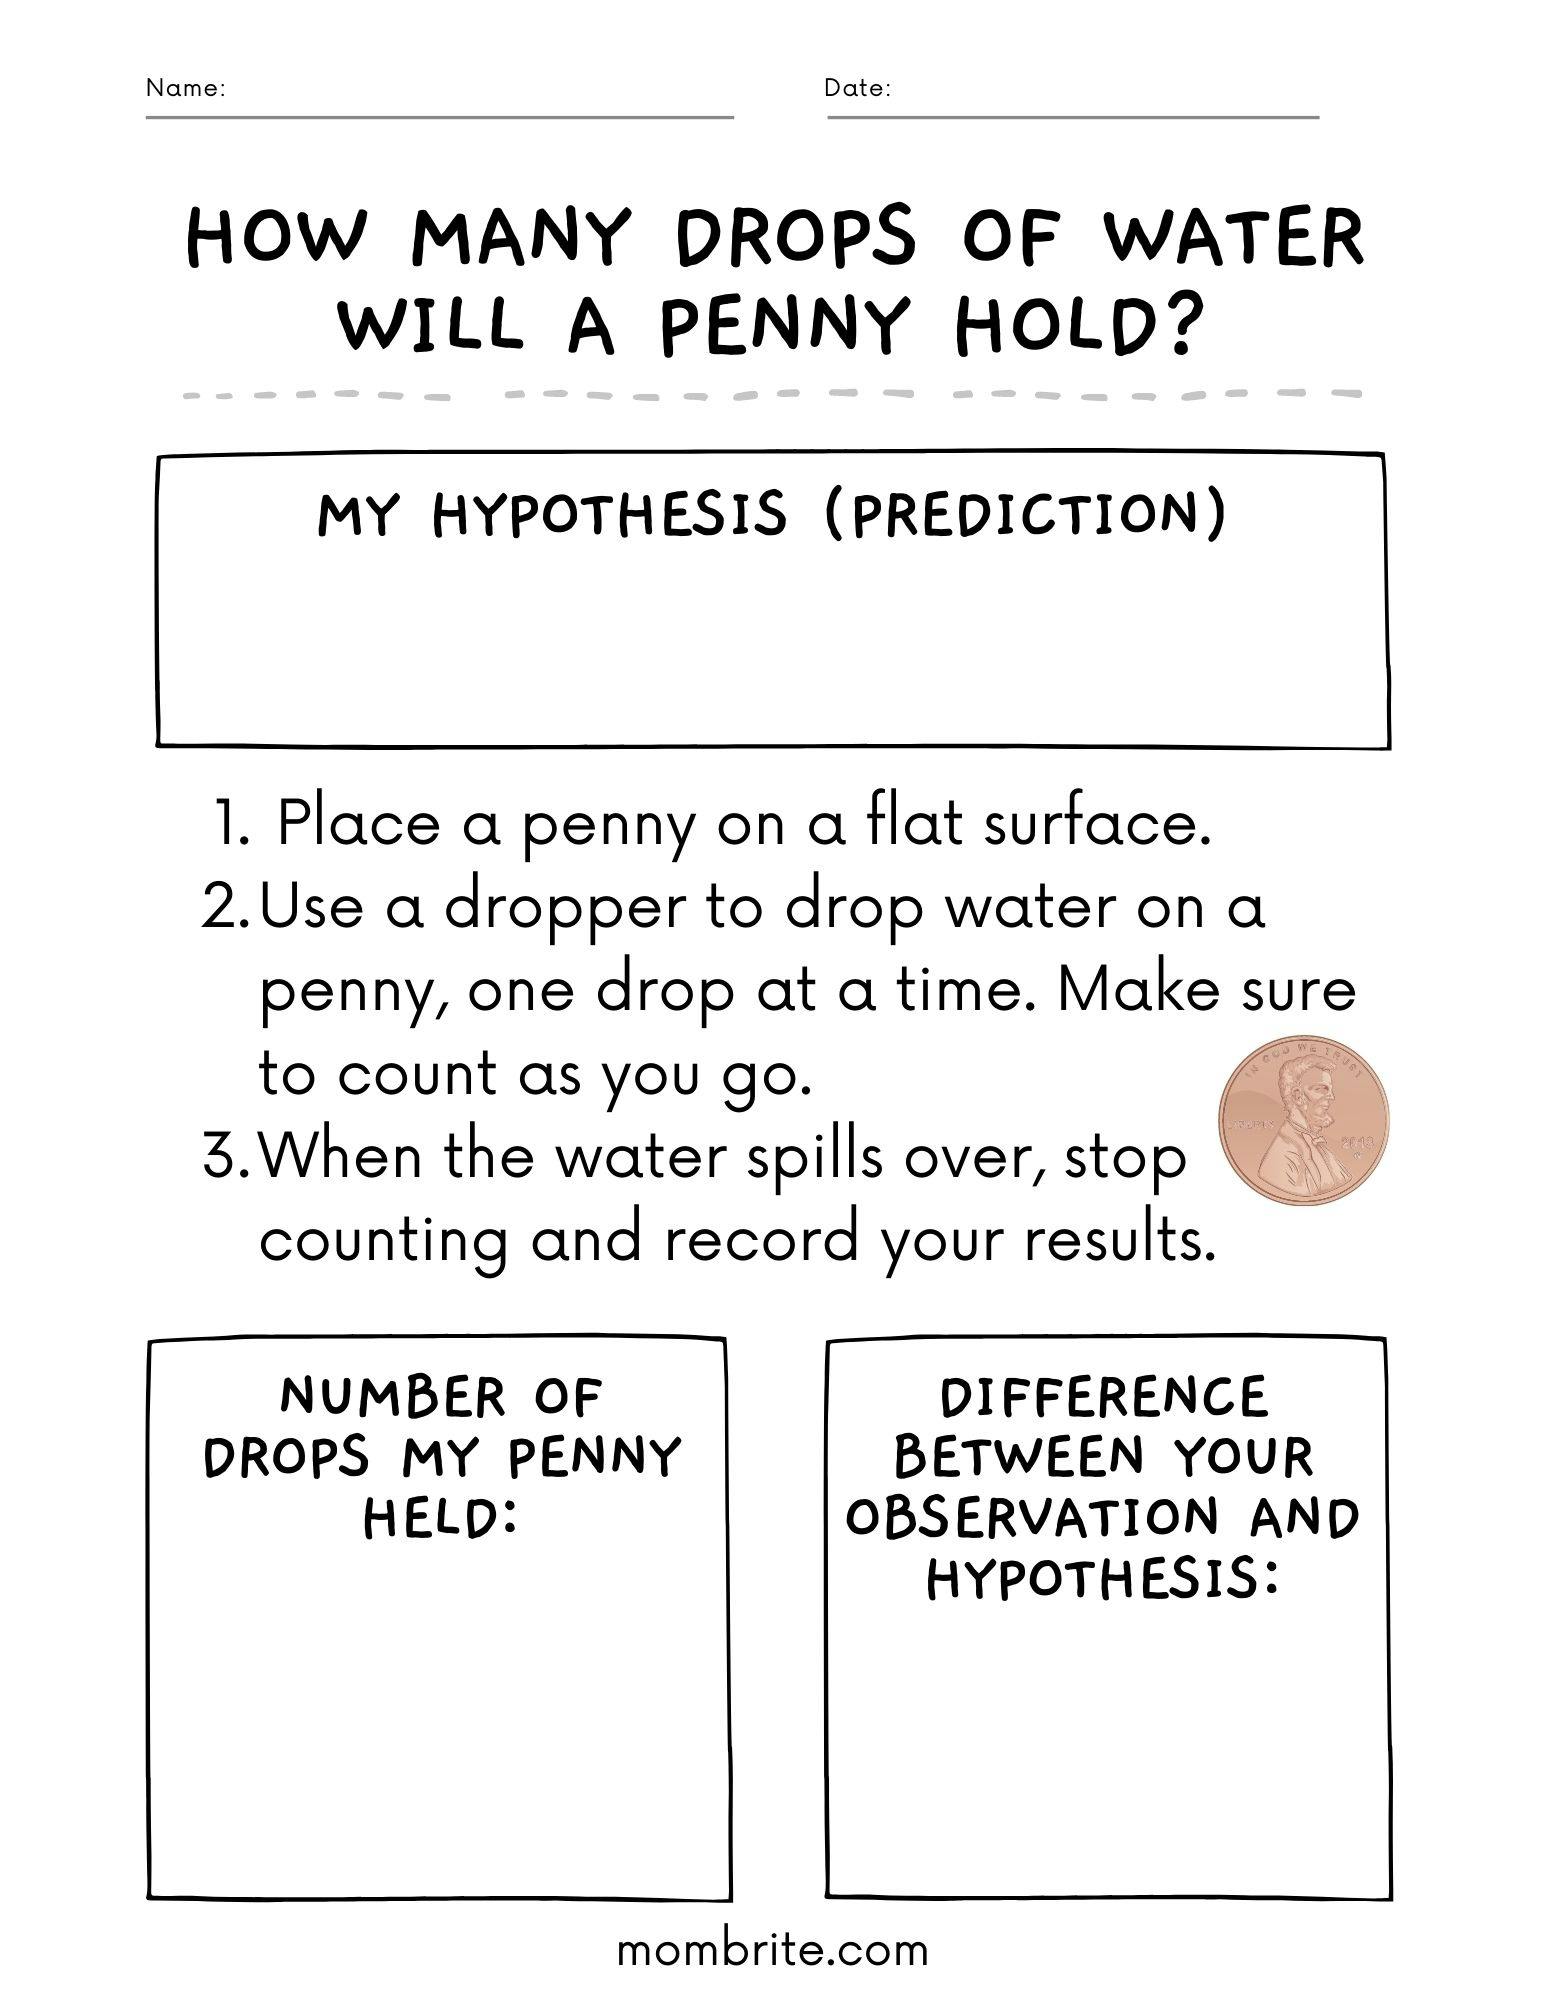 Free Drops of Water on a Penny Worksheet